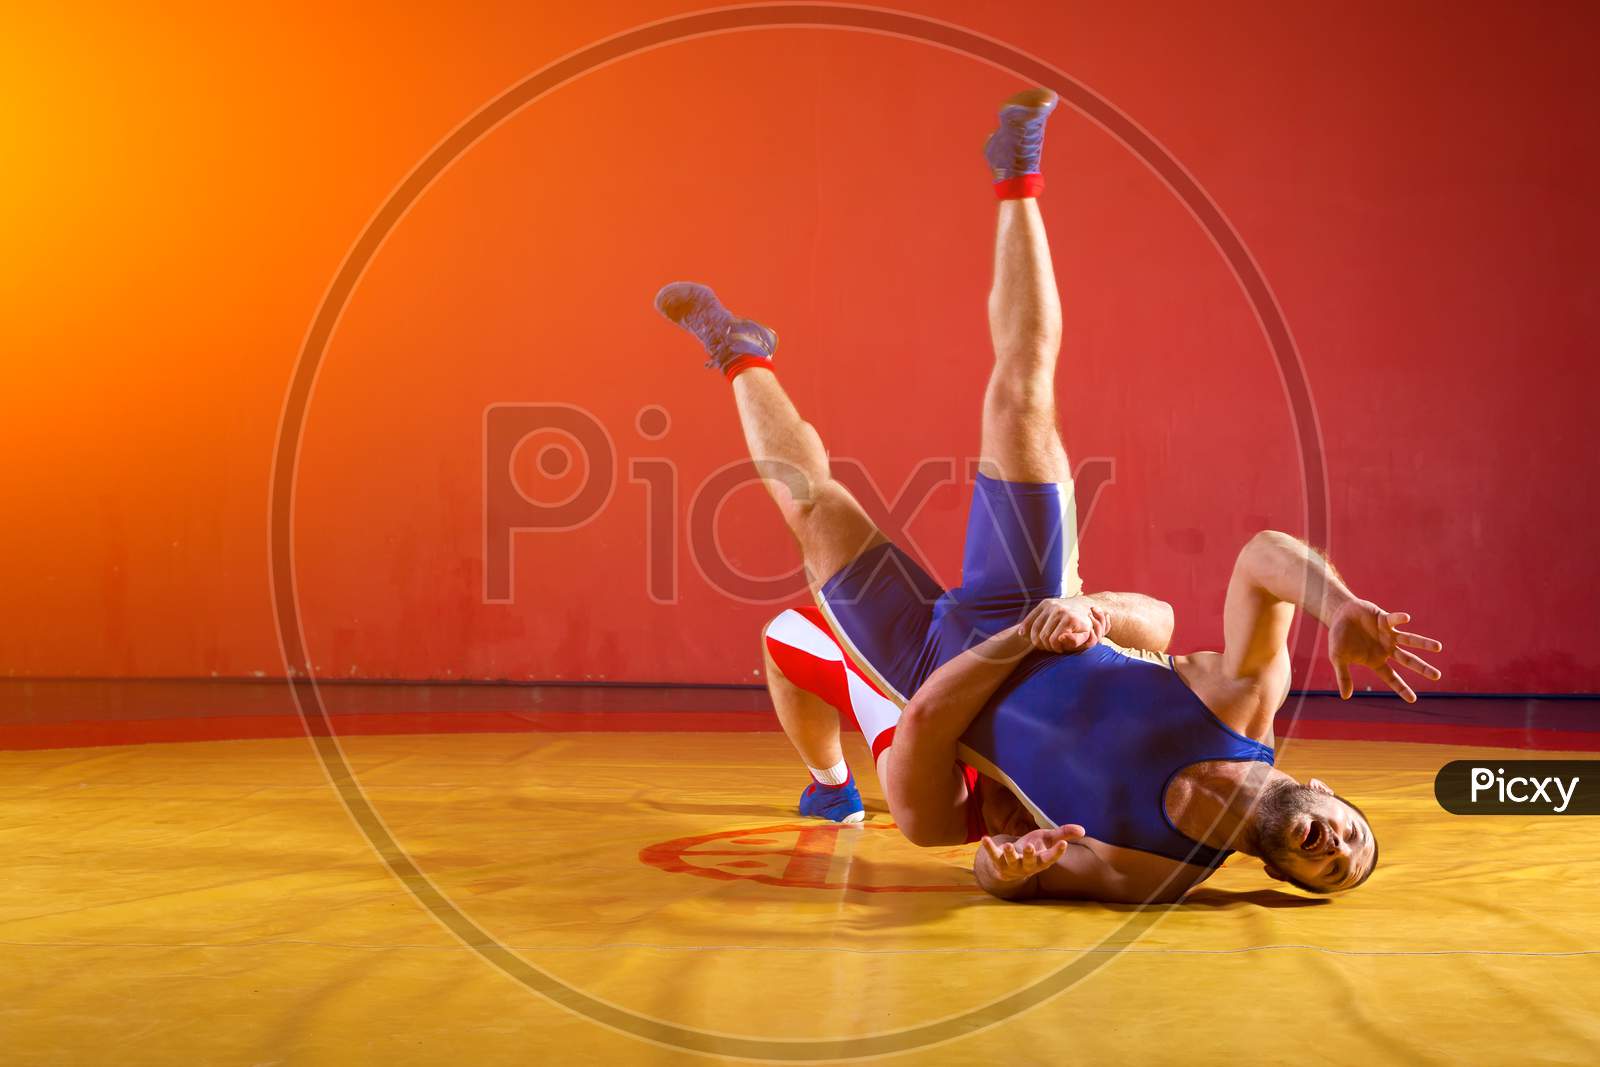 Two Greco-Roman  Wrestlers In Red And Blue Uniform Wrestling   On A Yellow Wrestling Carpet In The Gym